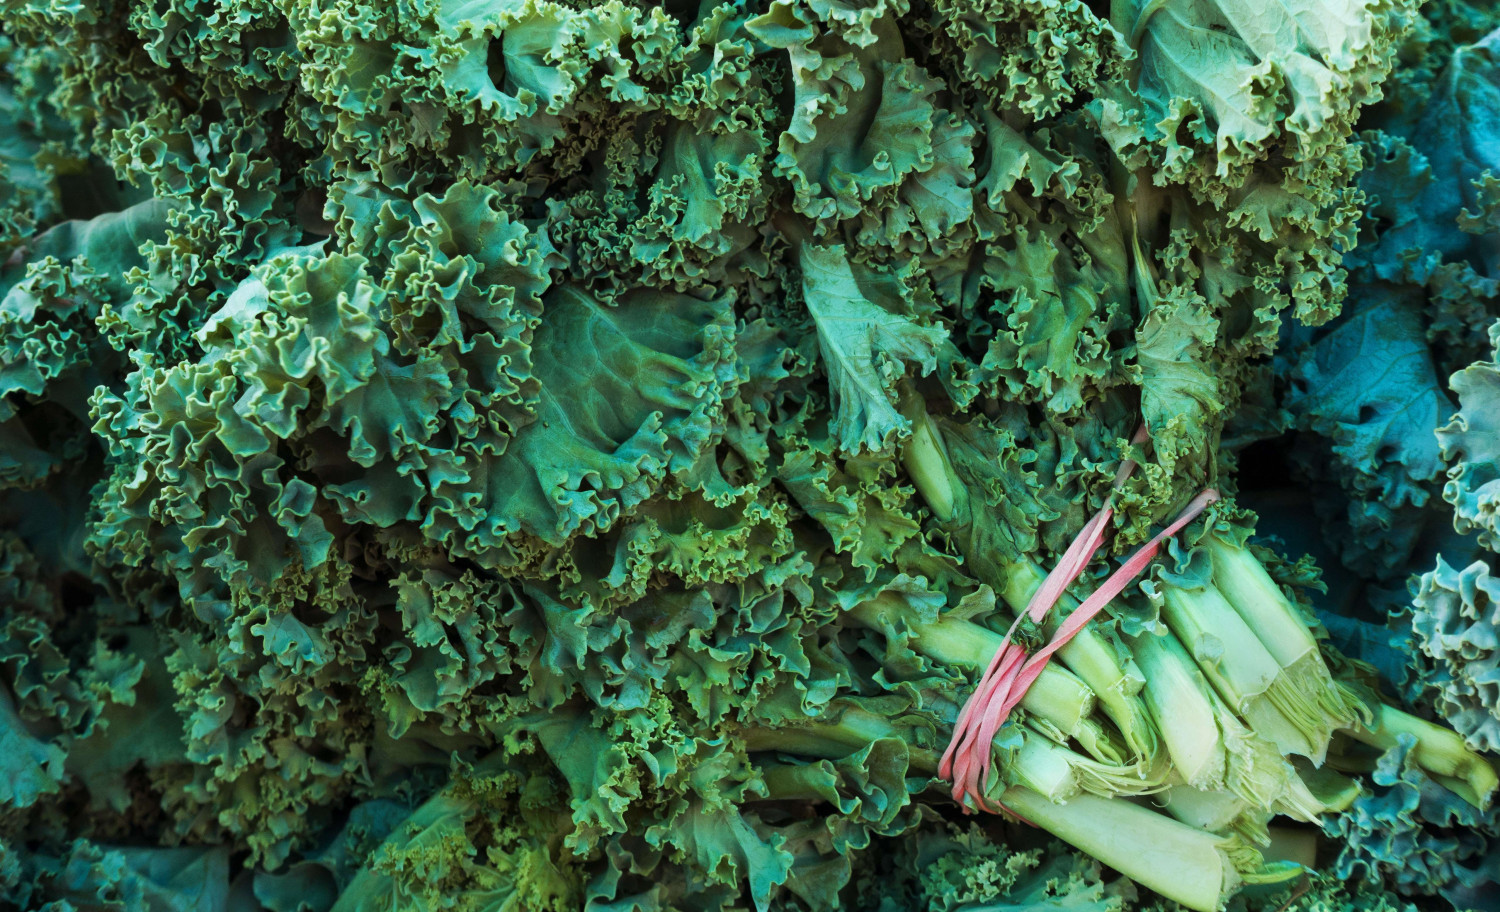 Kale’s Healthy Reputation Takes a Knock in ‘Dirty’ Pesticide Report